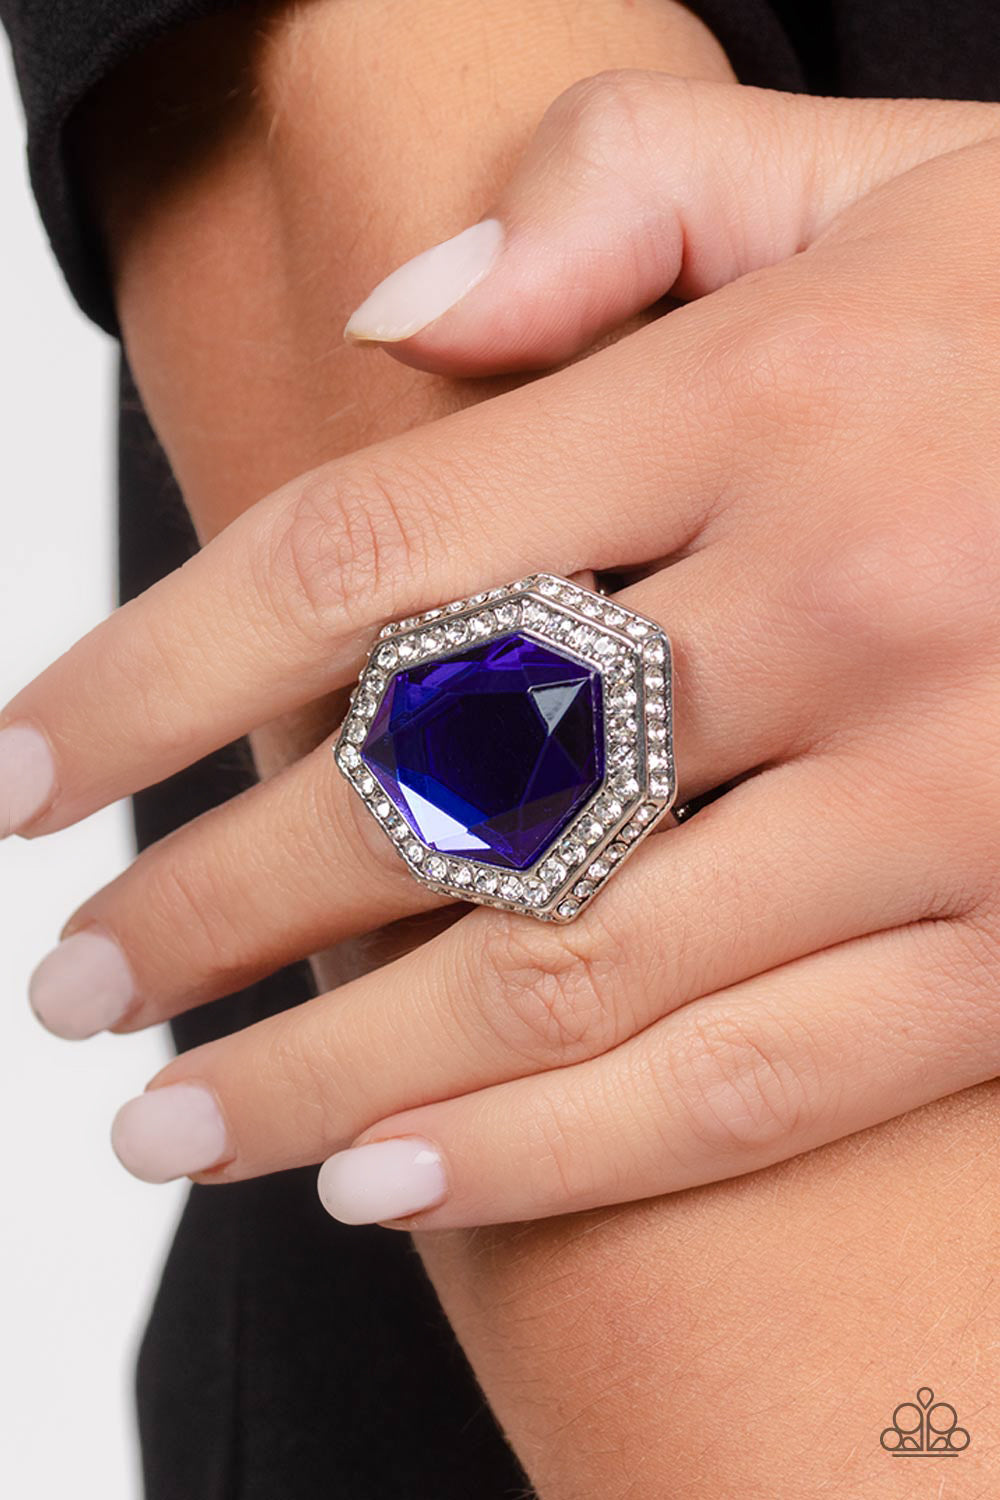 Smoldering Sass Blue Ring - Paparazzi Accessories   An oversized, asymmetrical, royal blue gem smolders inside an asymmetrical, dual frame encrusted with dainty white rhinestones. The resulting sparkle combines into a jaw-dropping, exaggerated centerpiece atop the finger. Features a stretchy band for a flexible fit.  Sold as one individual ring.